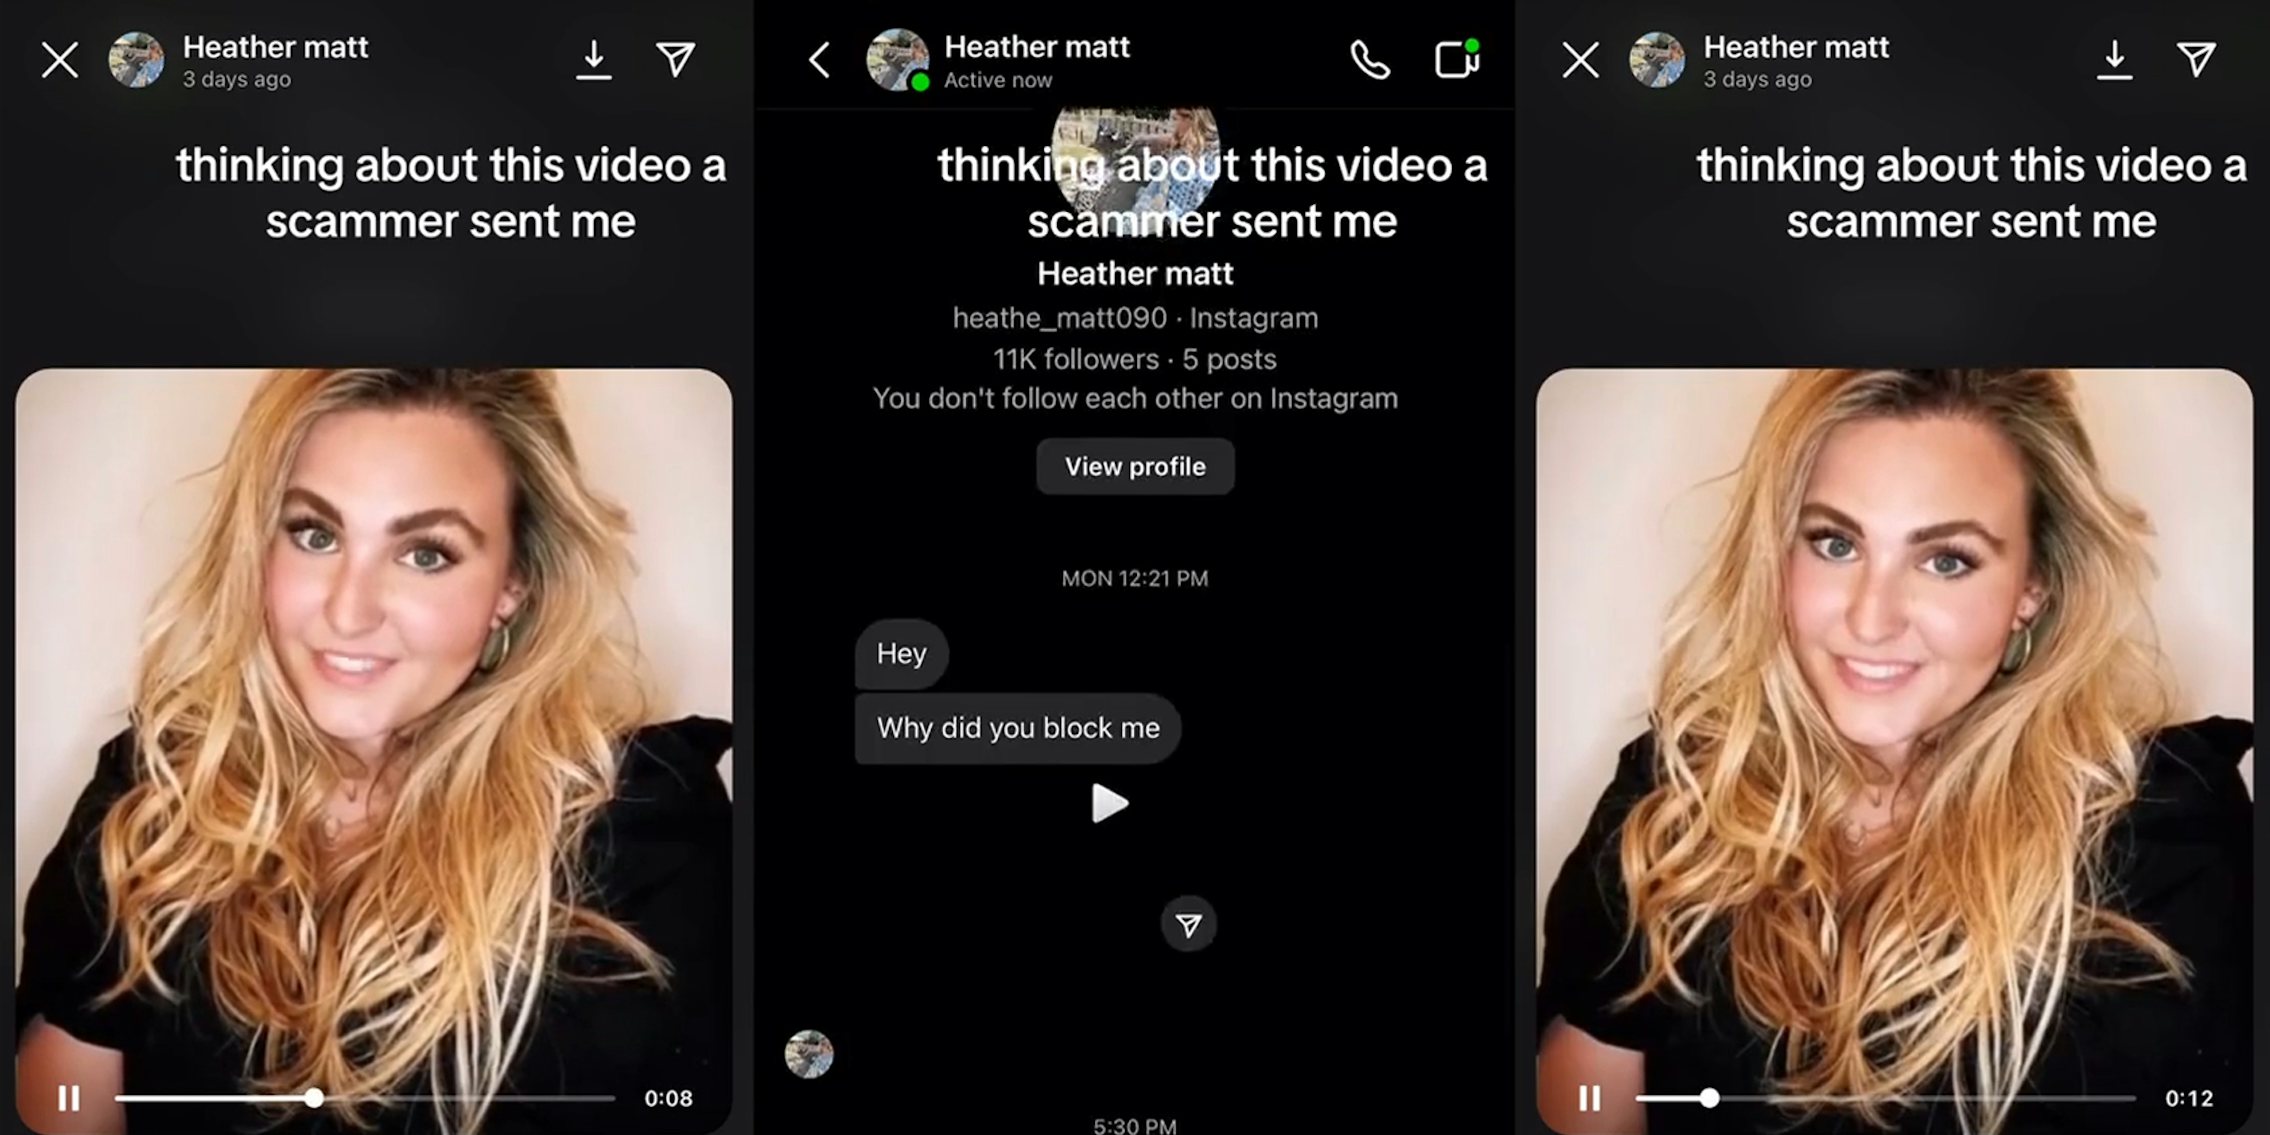 Instagram DM video with caption 'thinking about this video a scammer sent me' (l) Instagram DM's with caption 'thinking about this video a scammer sent me' (c) Instagram DM video with caption 'thinking about this video a scammer sent me' (r)